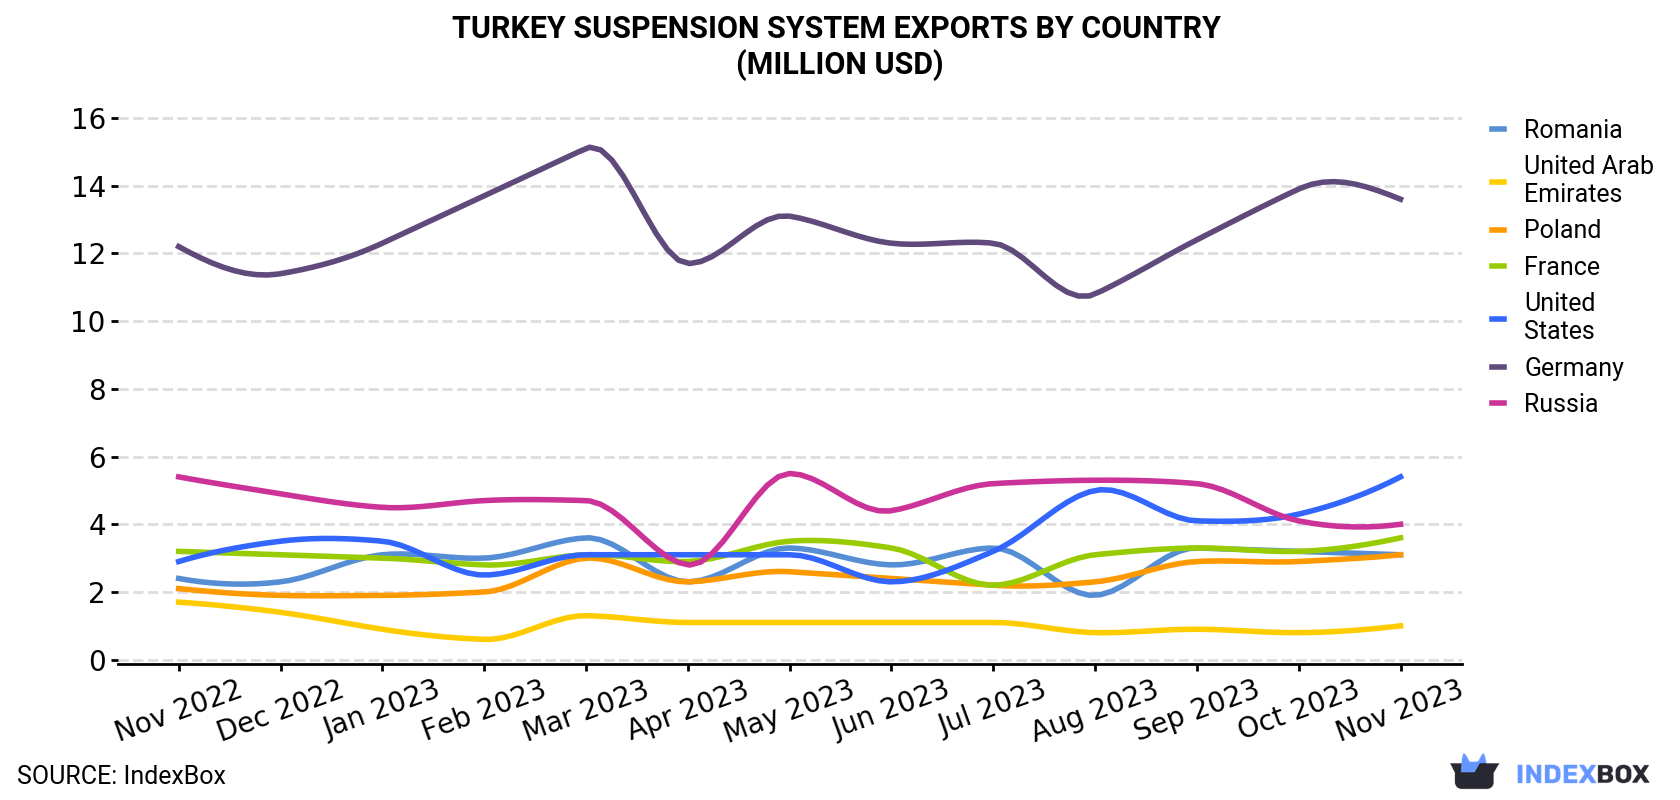 Turkey Suspension System Exports By Country (Million USD)